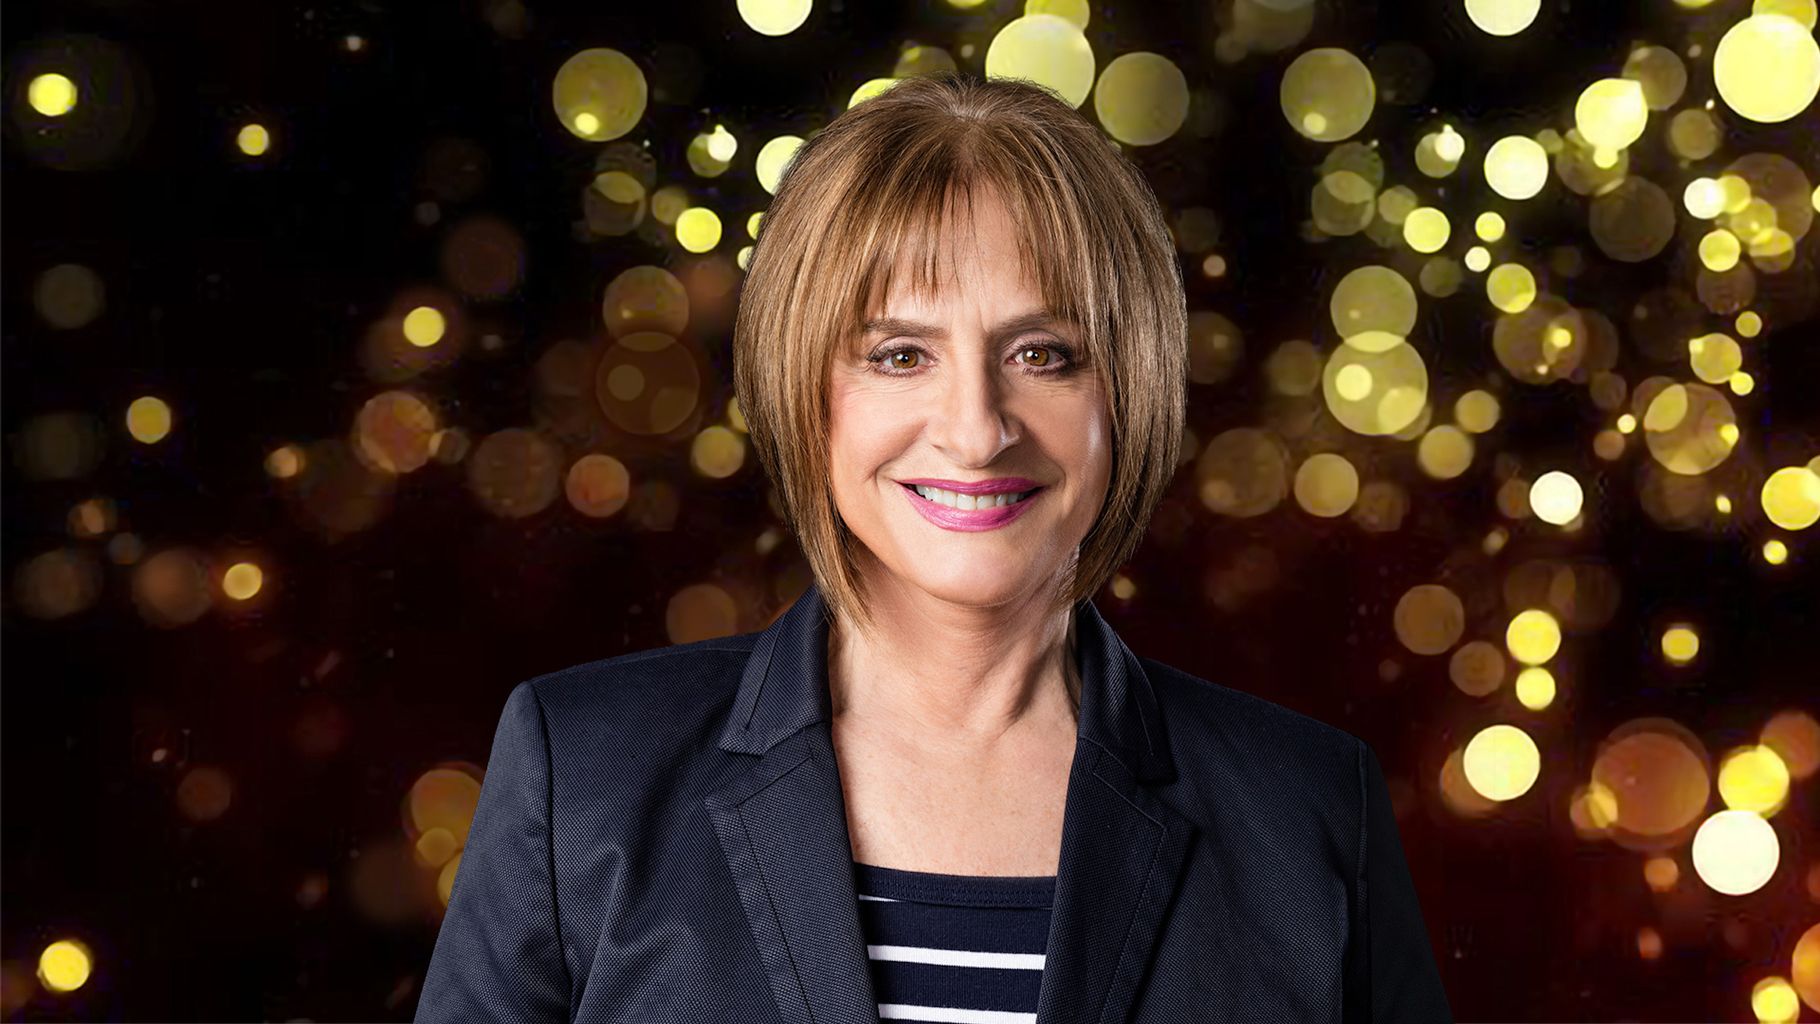 Broadway legend Patti LuPone is heading to Sydney, Brisbane, and Melbourne next month